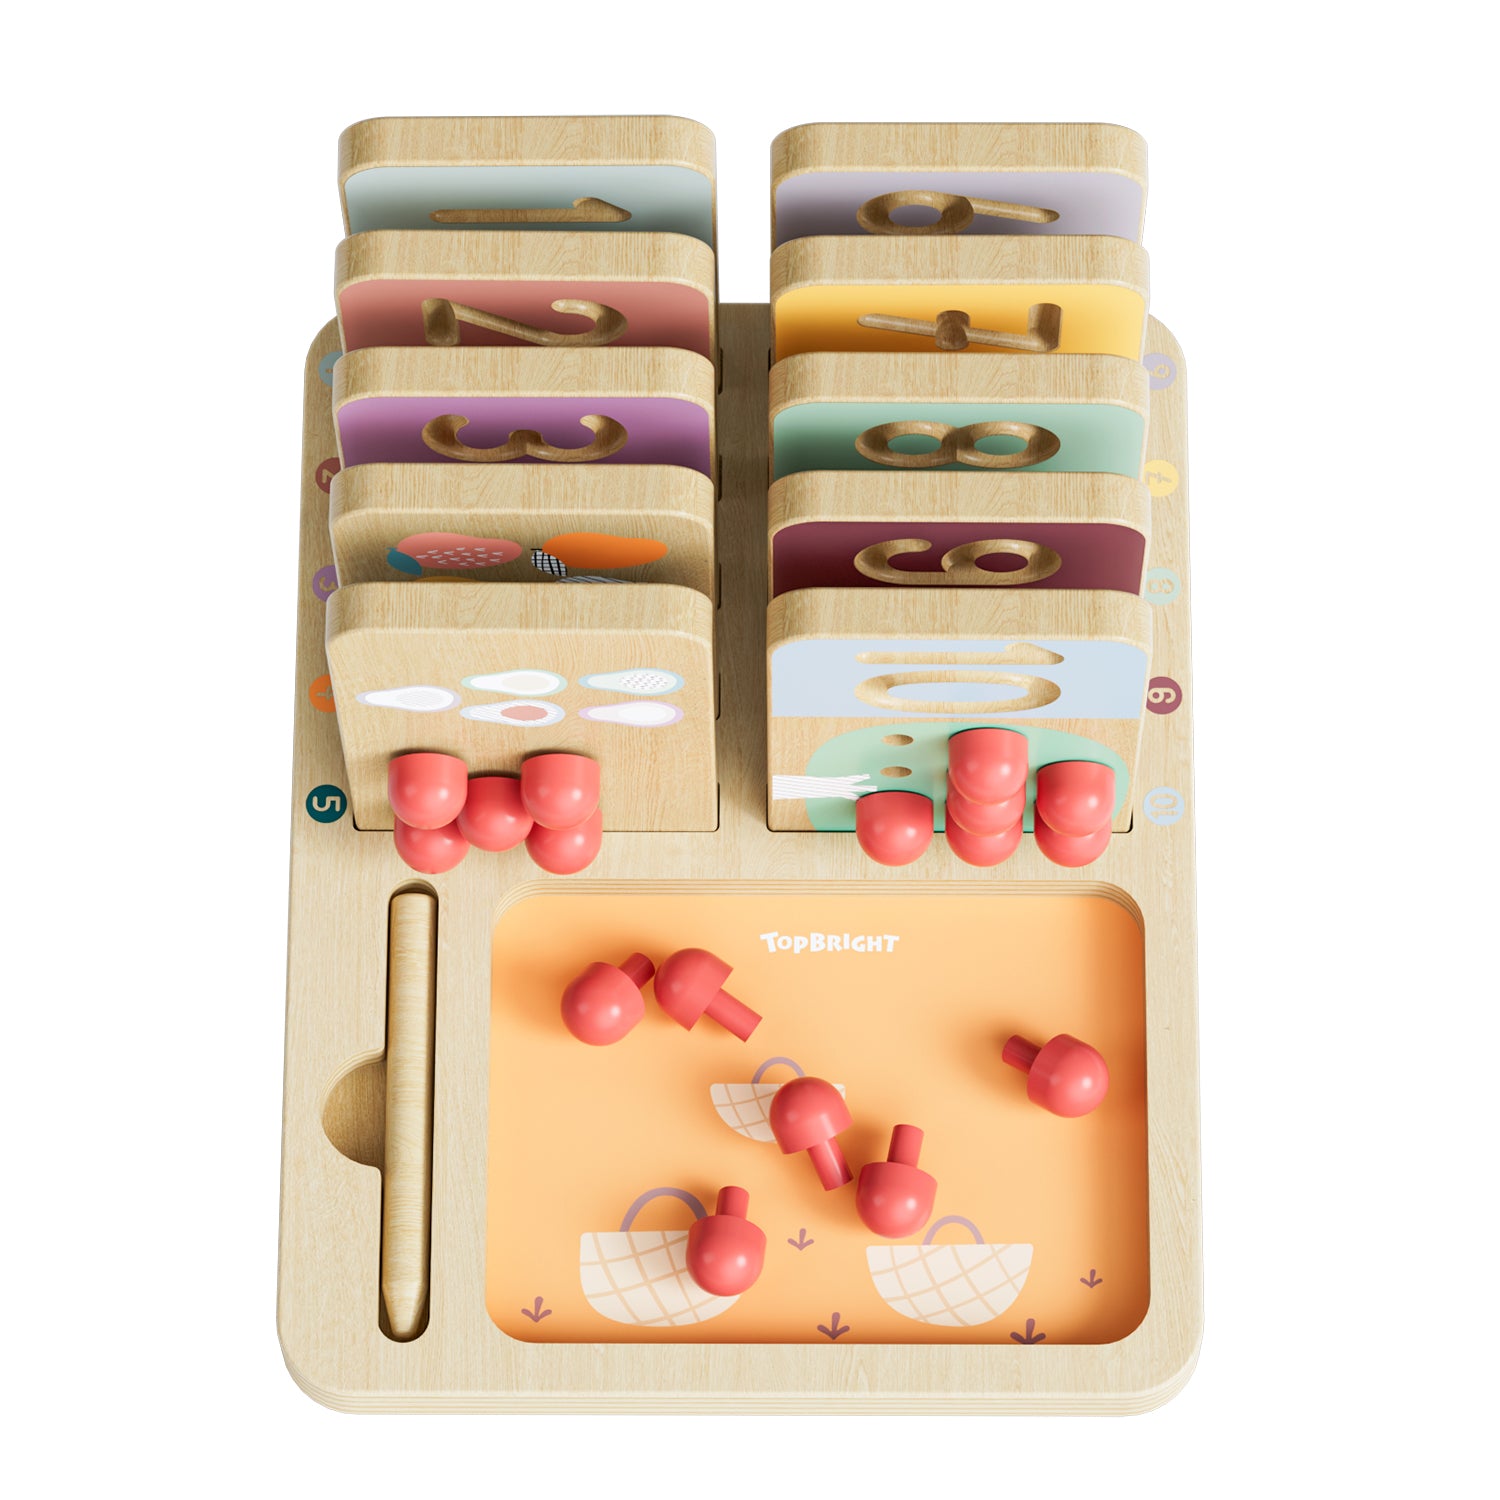  The wooden boards, apples, and wooden pencil each have their own place in the wooden base. When children have finished playing, they store everything there and it is quickly tidied away.